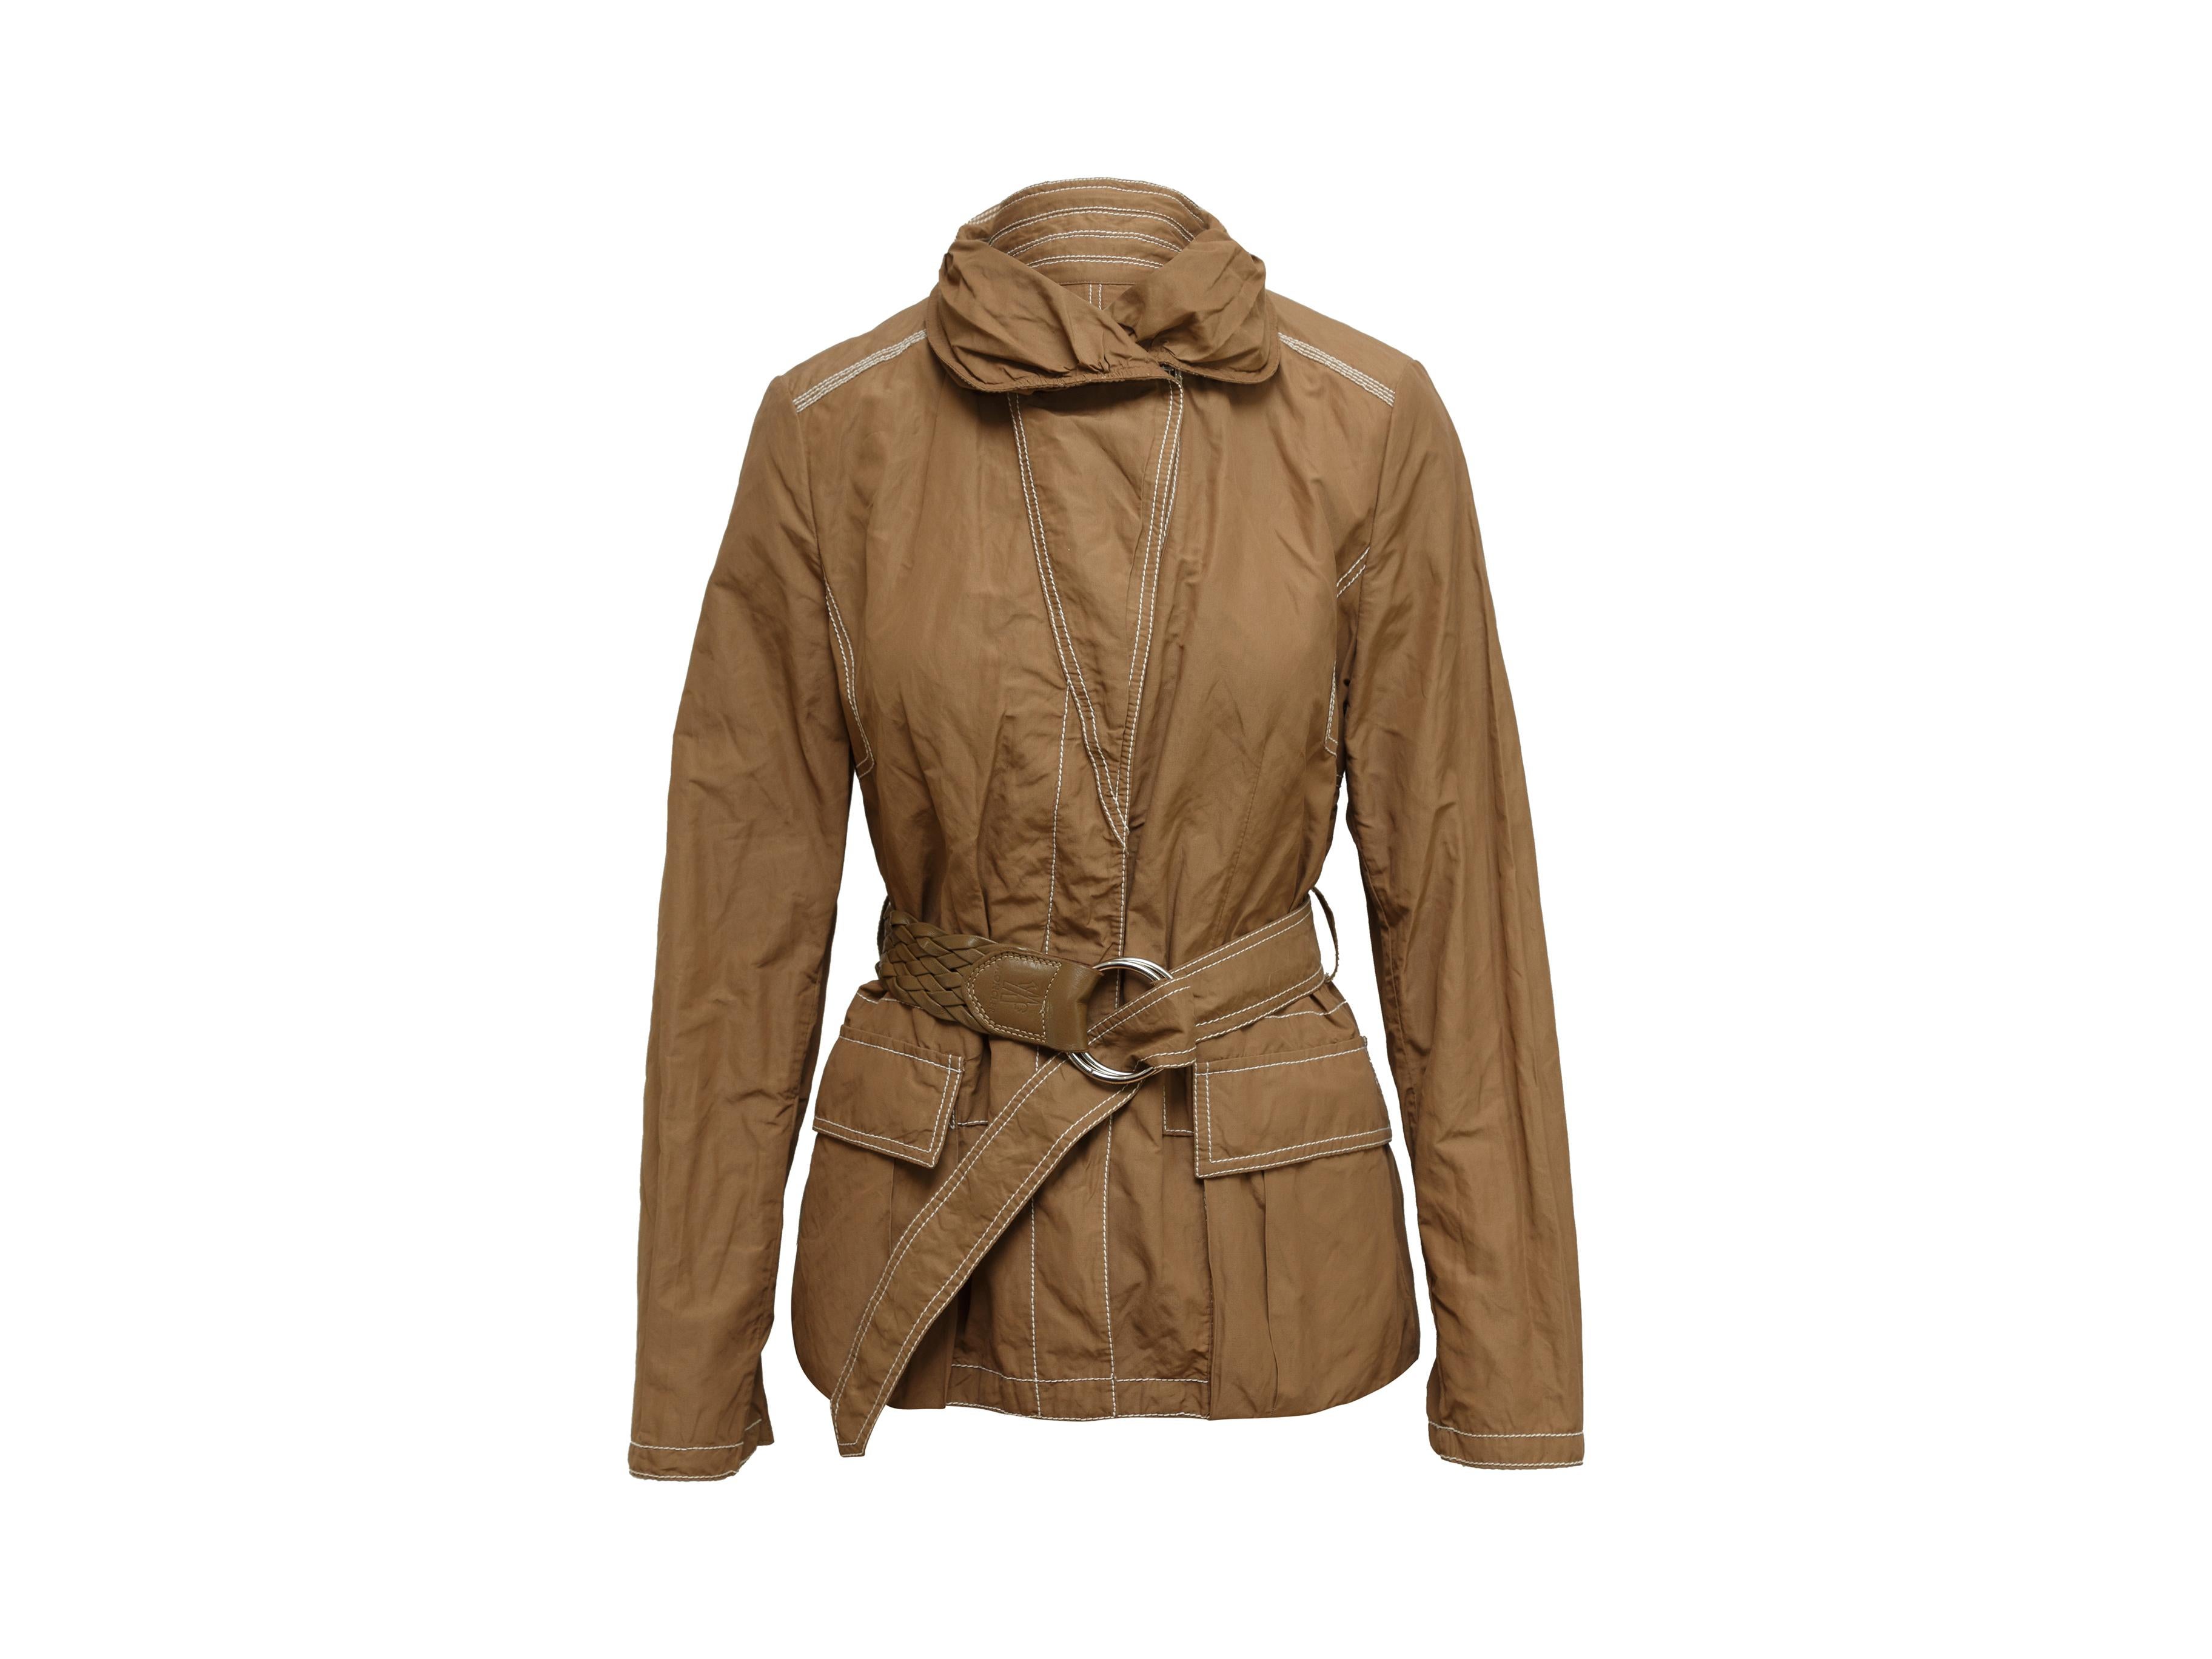 Product details: Brown lightweight jacket by Moncler. Contrast stitching throughout. High neck. Dual pockets at hips. Leather-accented leather belt at waist. Designer size 2. 36